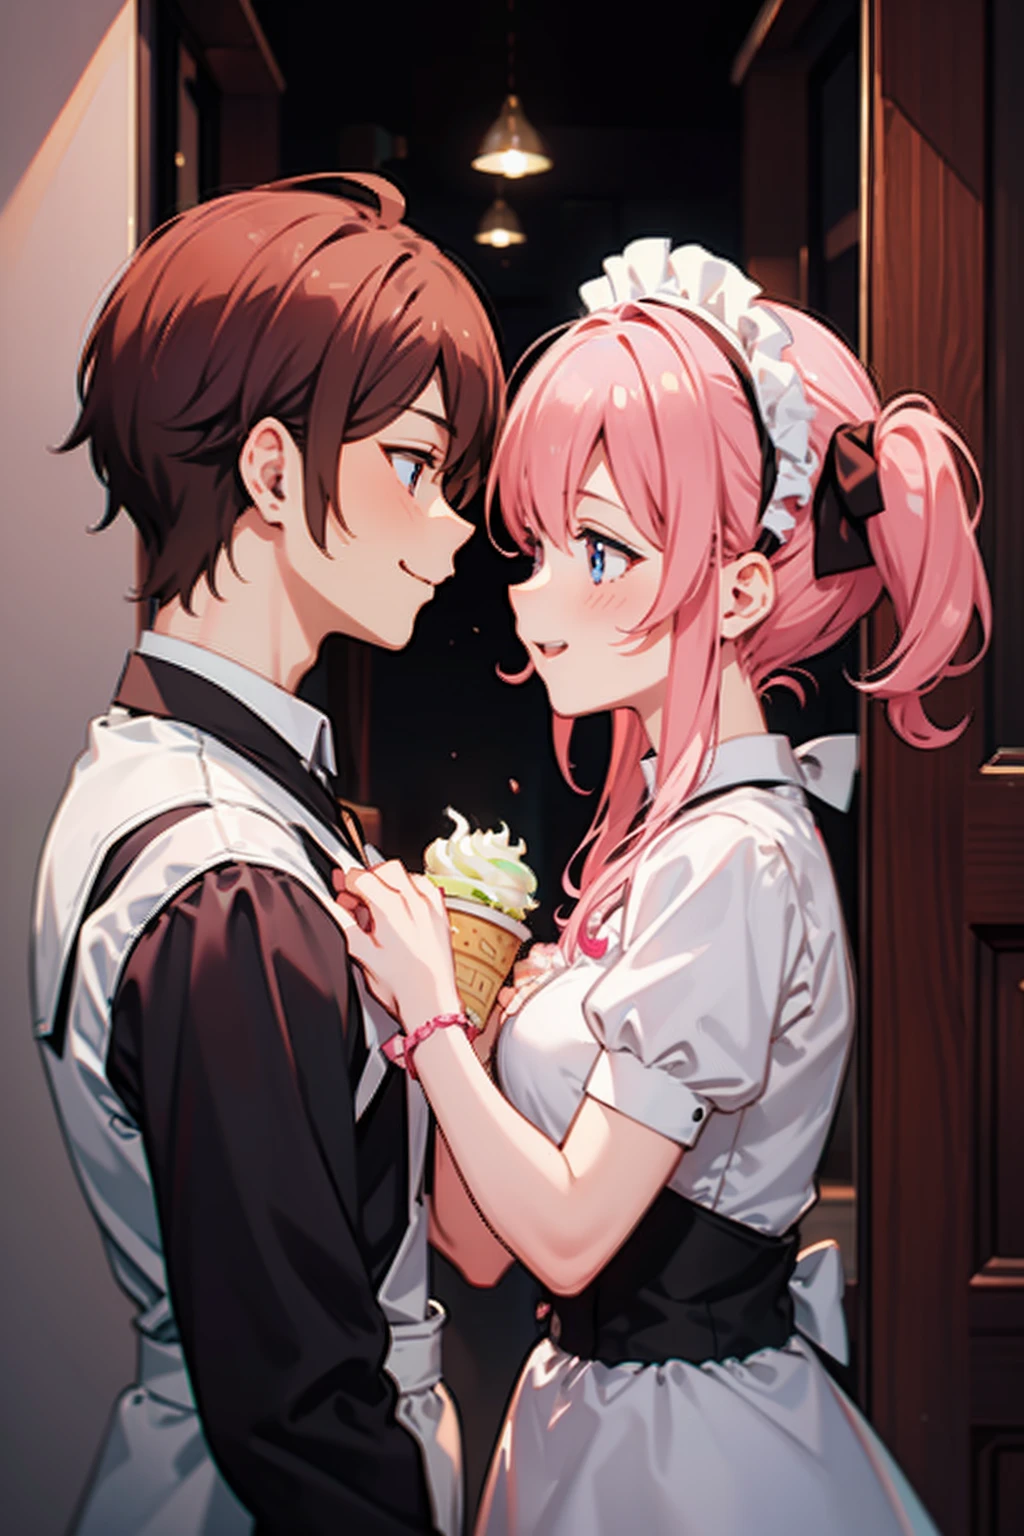 35mm, f/2.8, anime couple , GIRL WITH PINK HAIR IN A MAID COSTUME IN THE HANDS OF ICE CREAM , BOY WITH DARK HAIR LAUGHING, positive , High quality hands , cuteface, hiquality